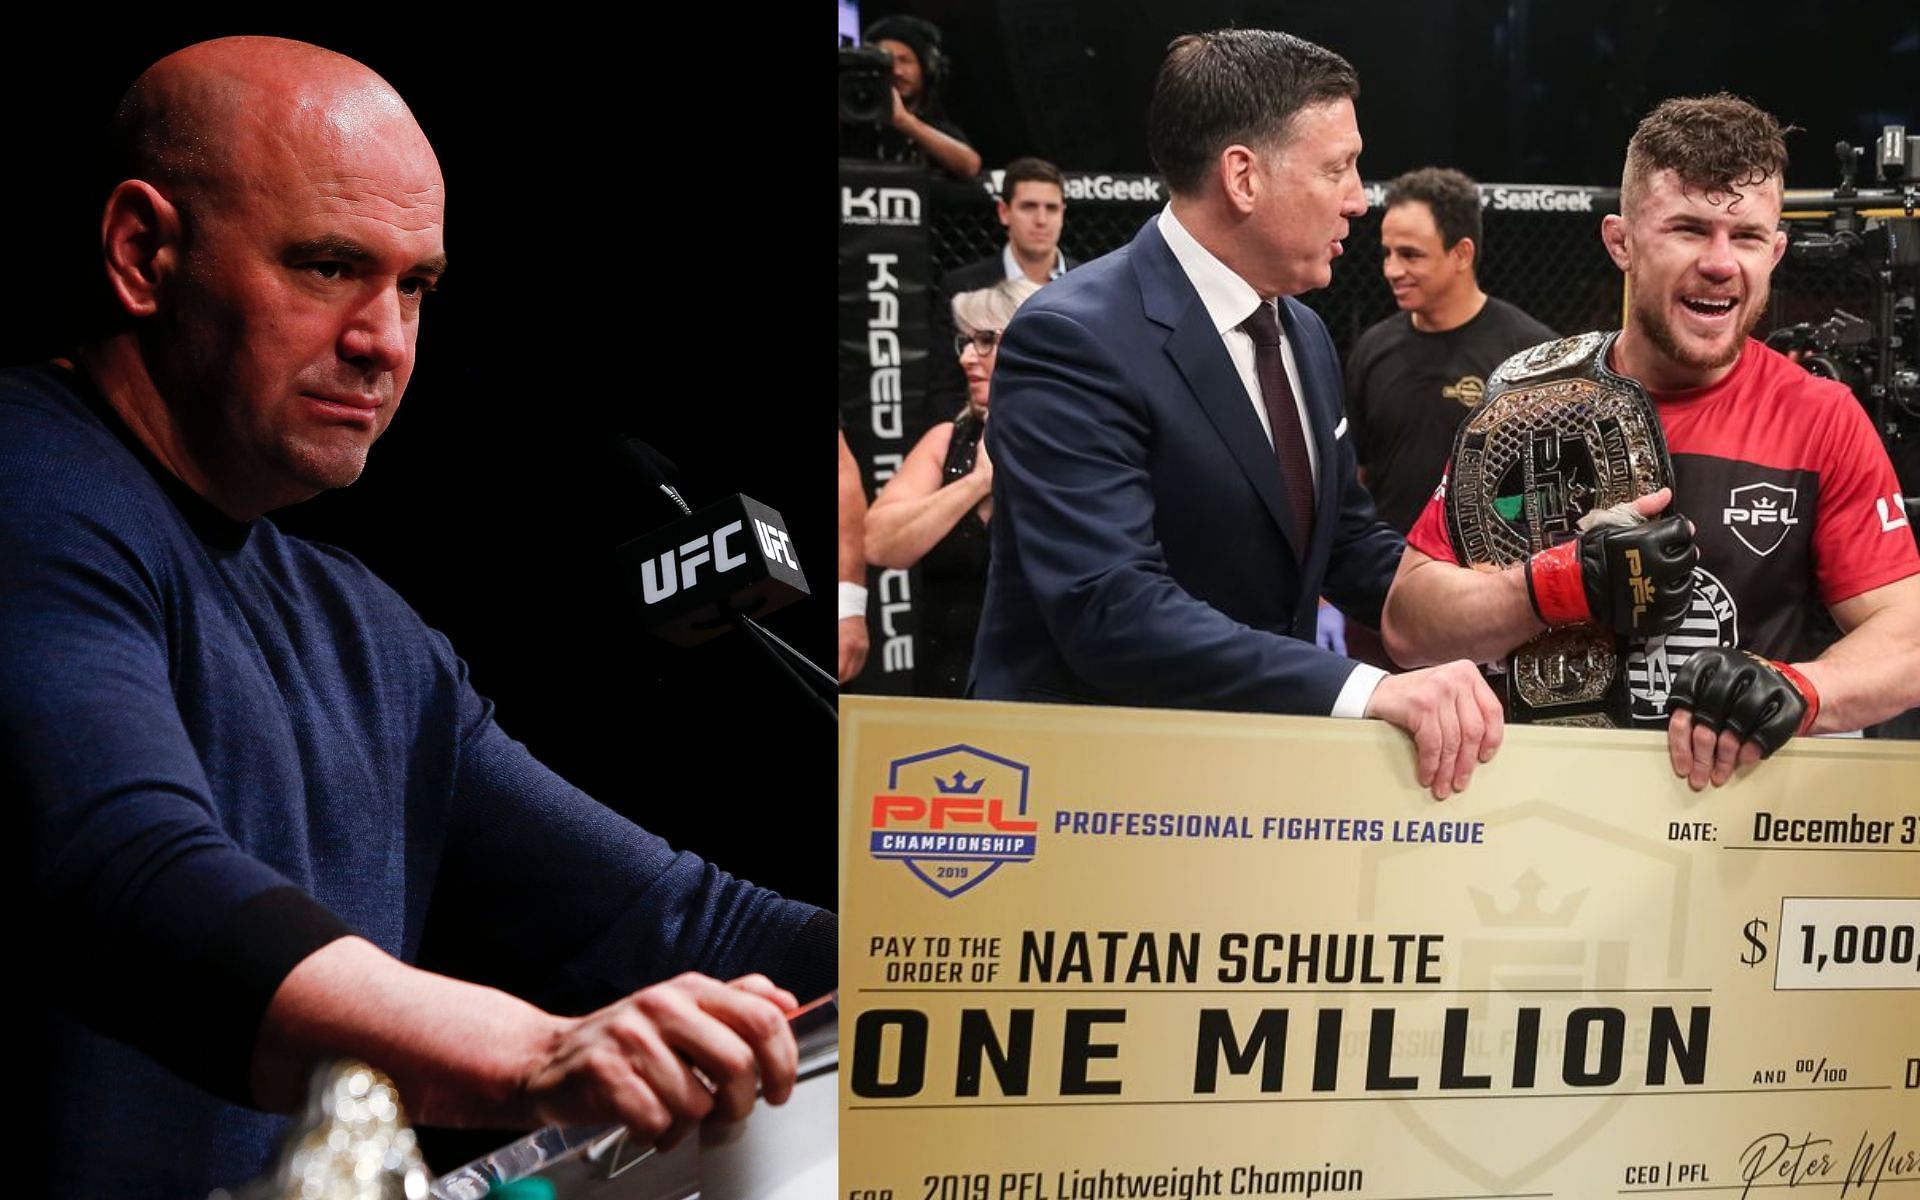 Dana White (left) and PFL prize money (right). [Images courtesy: left image from Getty Images and right image from PFL]